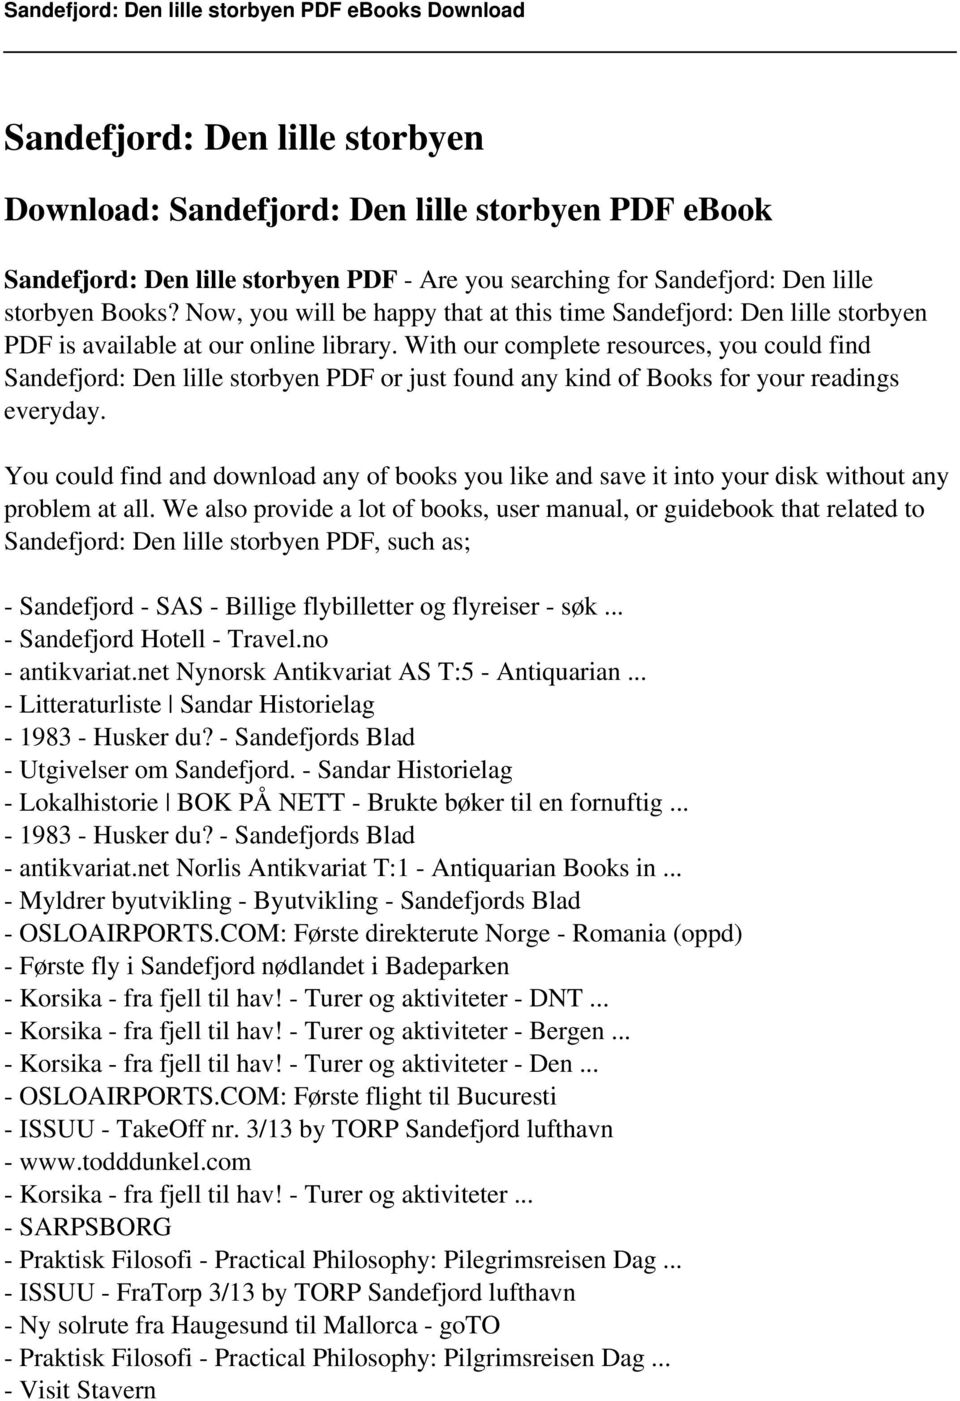 With our complete resources, you could find Sandefjord: Den lille storbyen PDF or just found any kind of Books for your readings everyday.